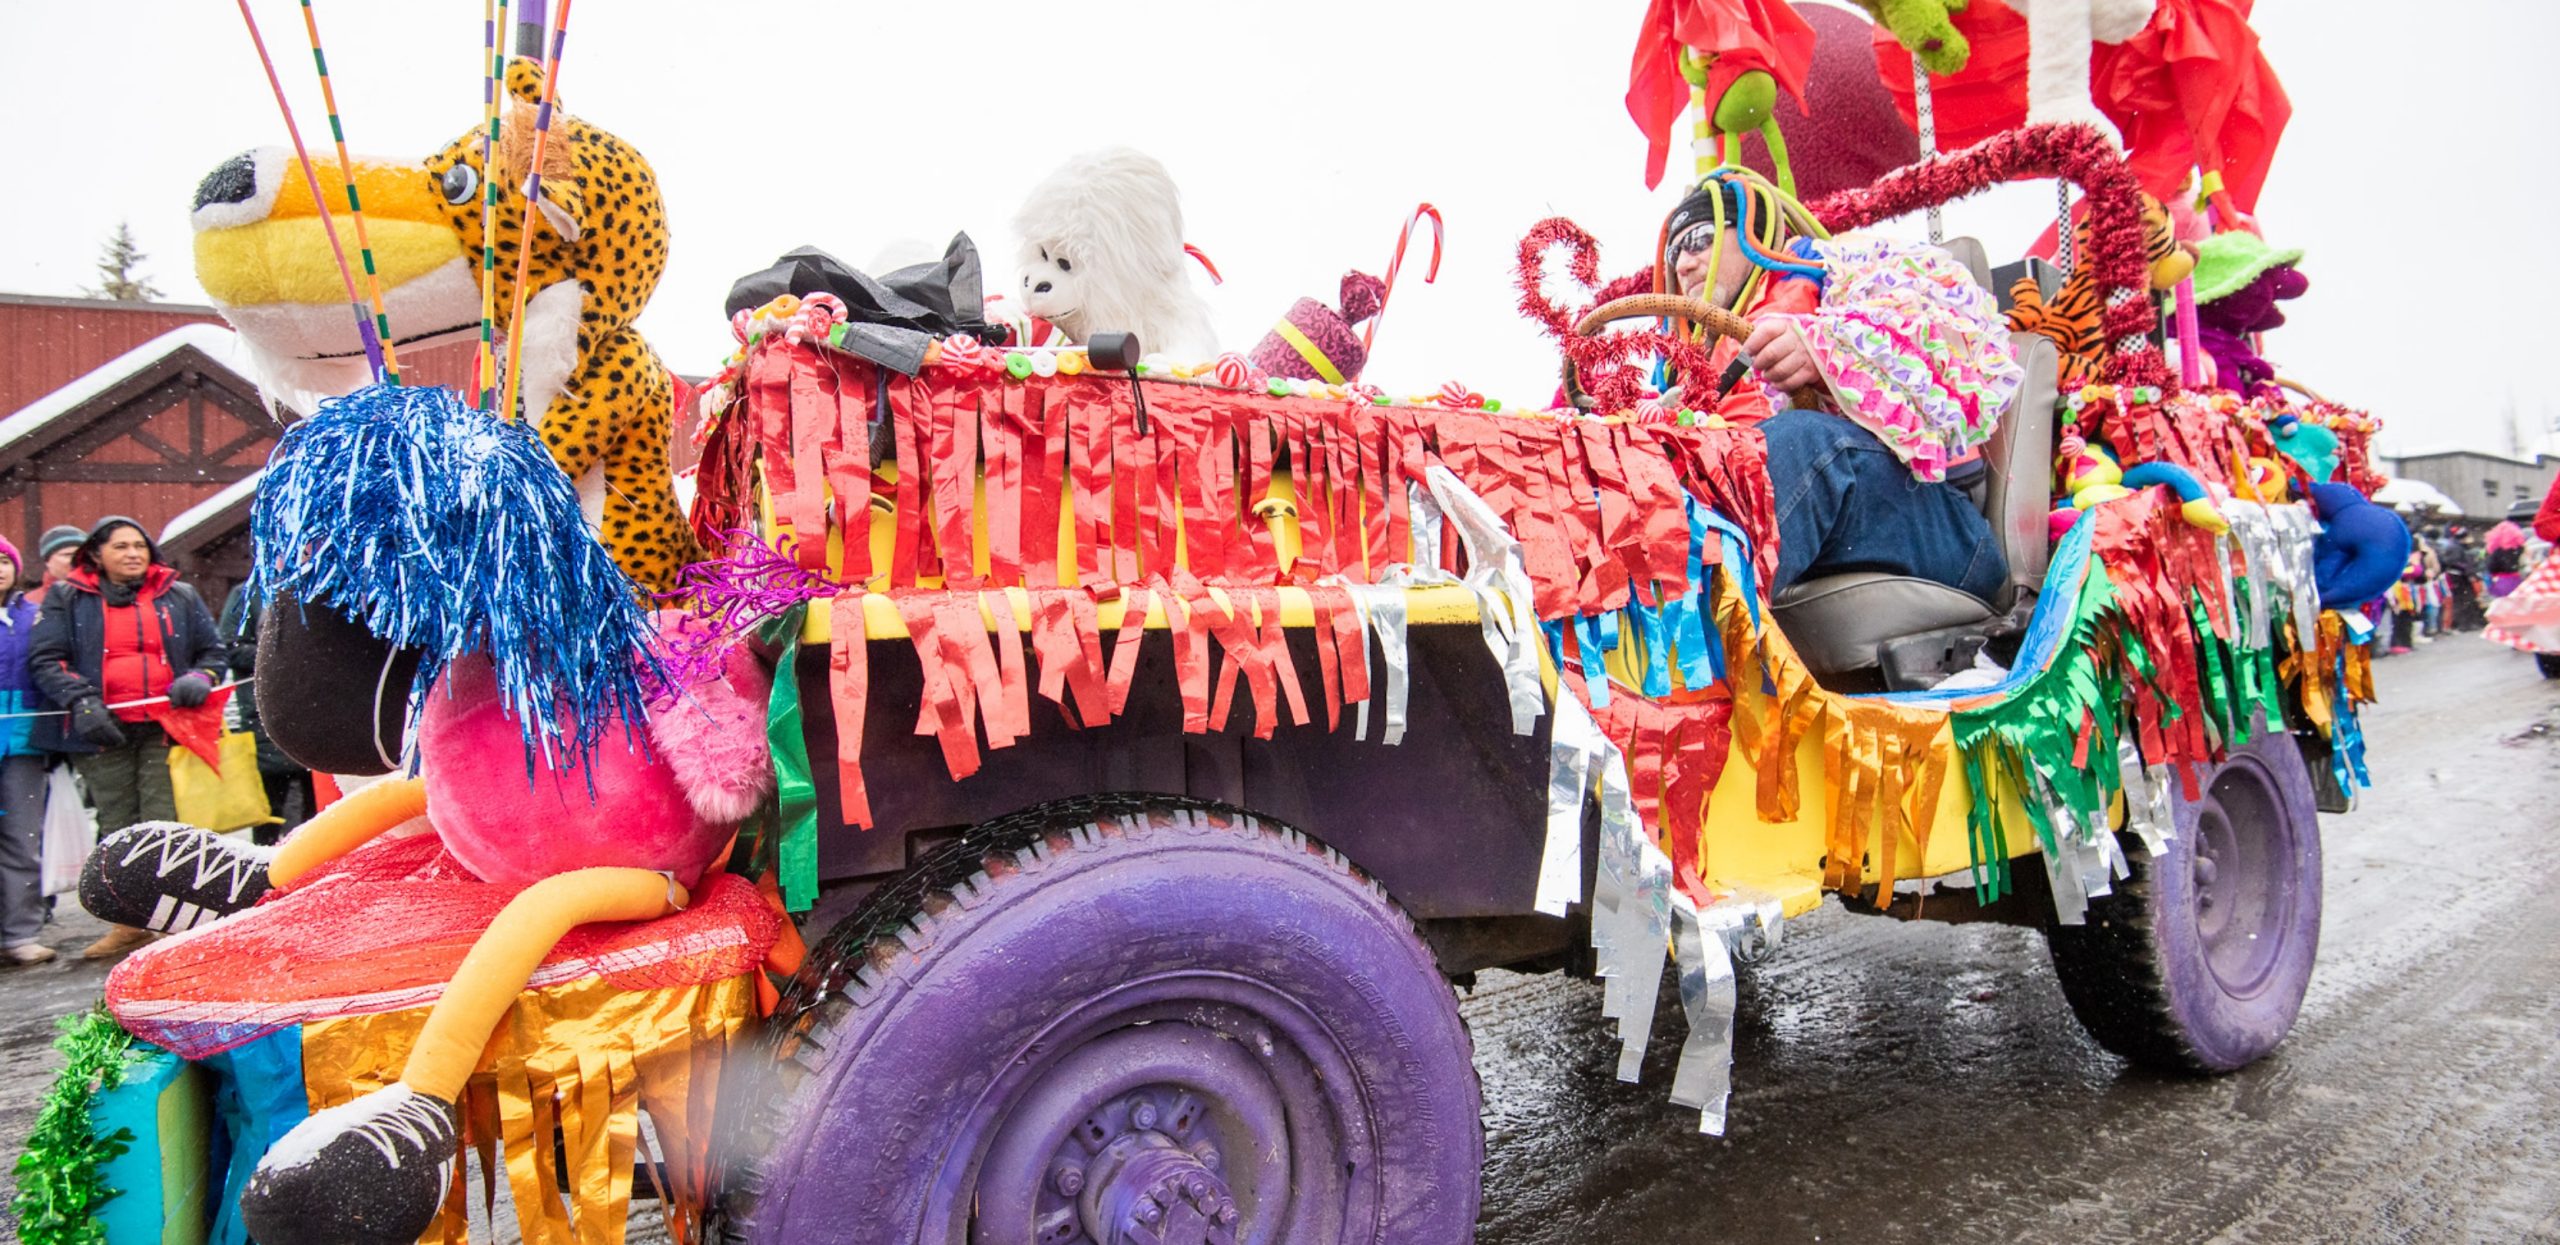 A man drives a Jeep decked out in colorful fringe, tinsel, and stuffed animals.